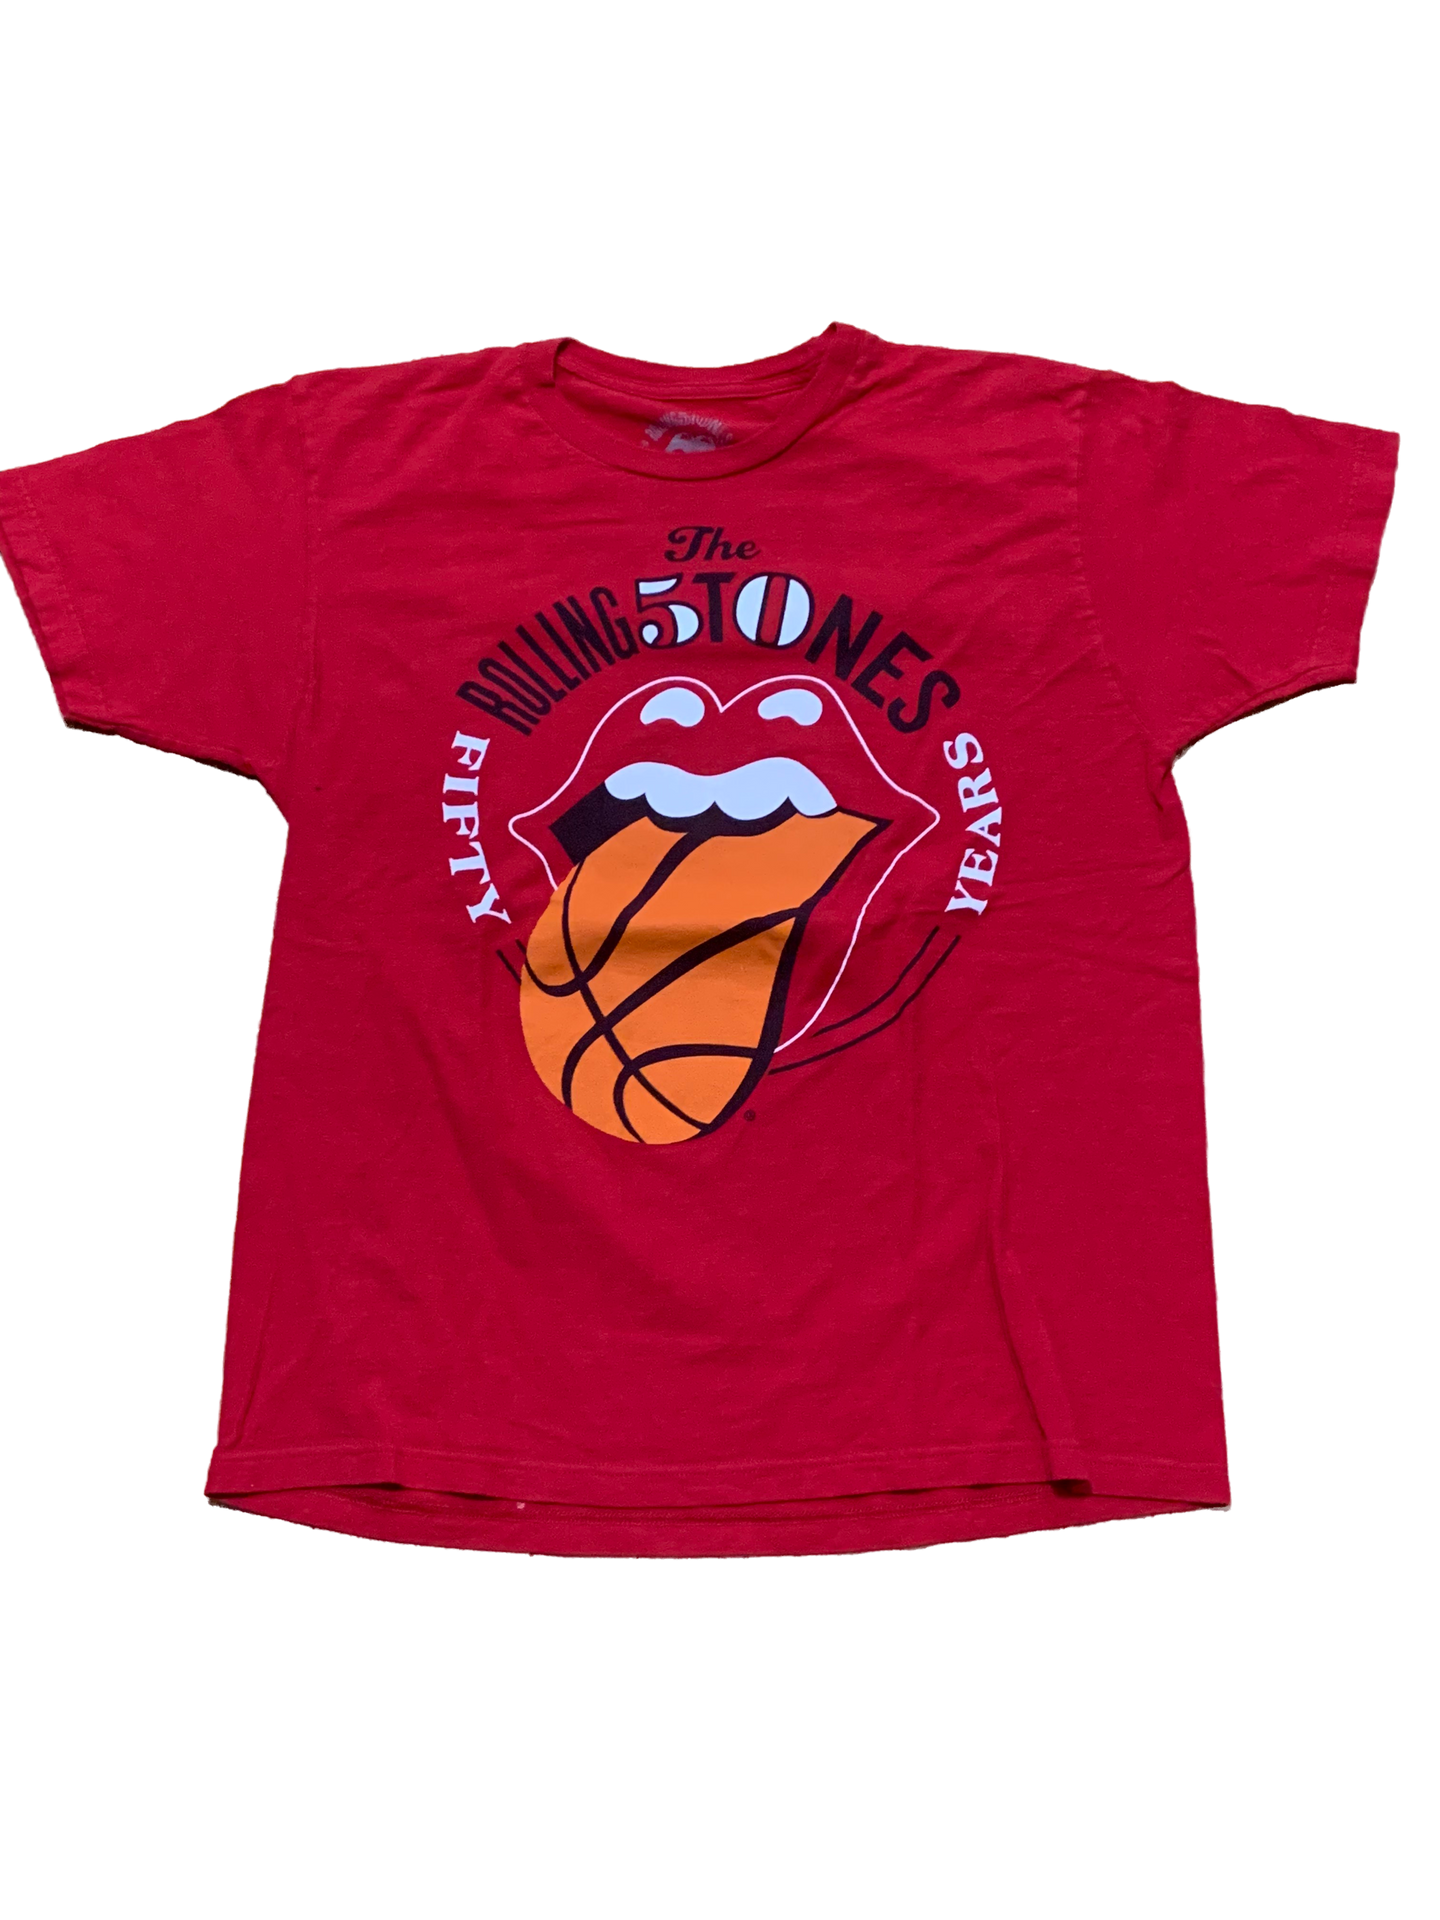 Vintage Rolling Stones Tee (Chicago Basketball)